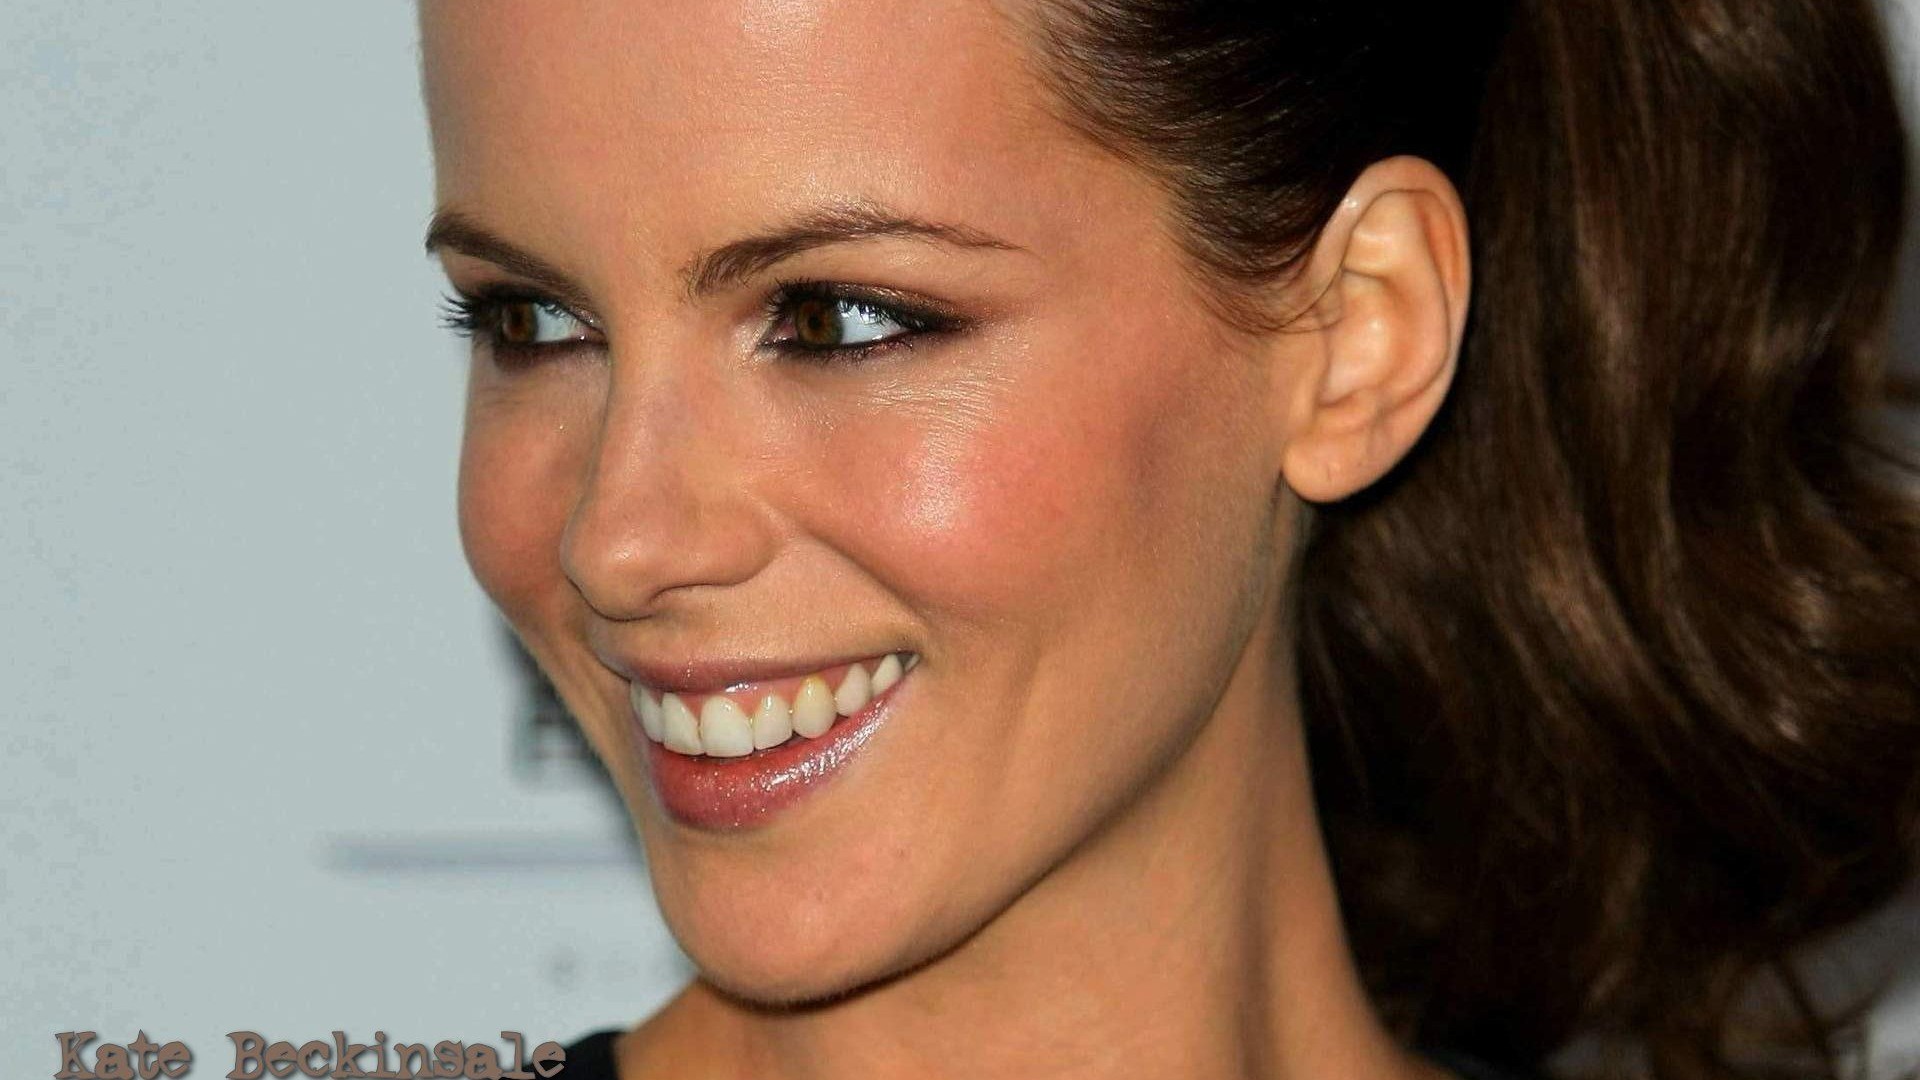 Kate Beckinsale #077 - 1920x1080 Wallpapers Pictures Photos Images